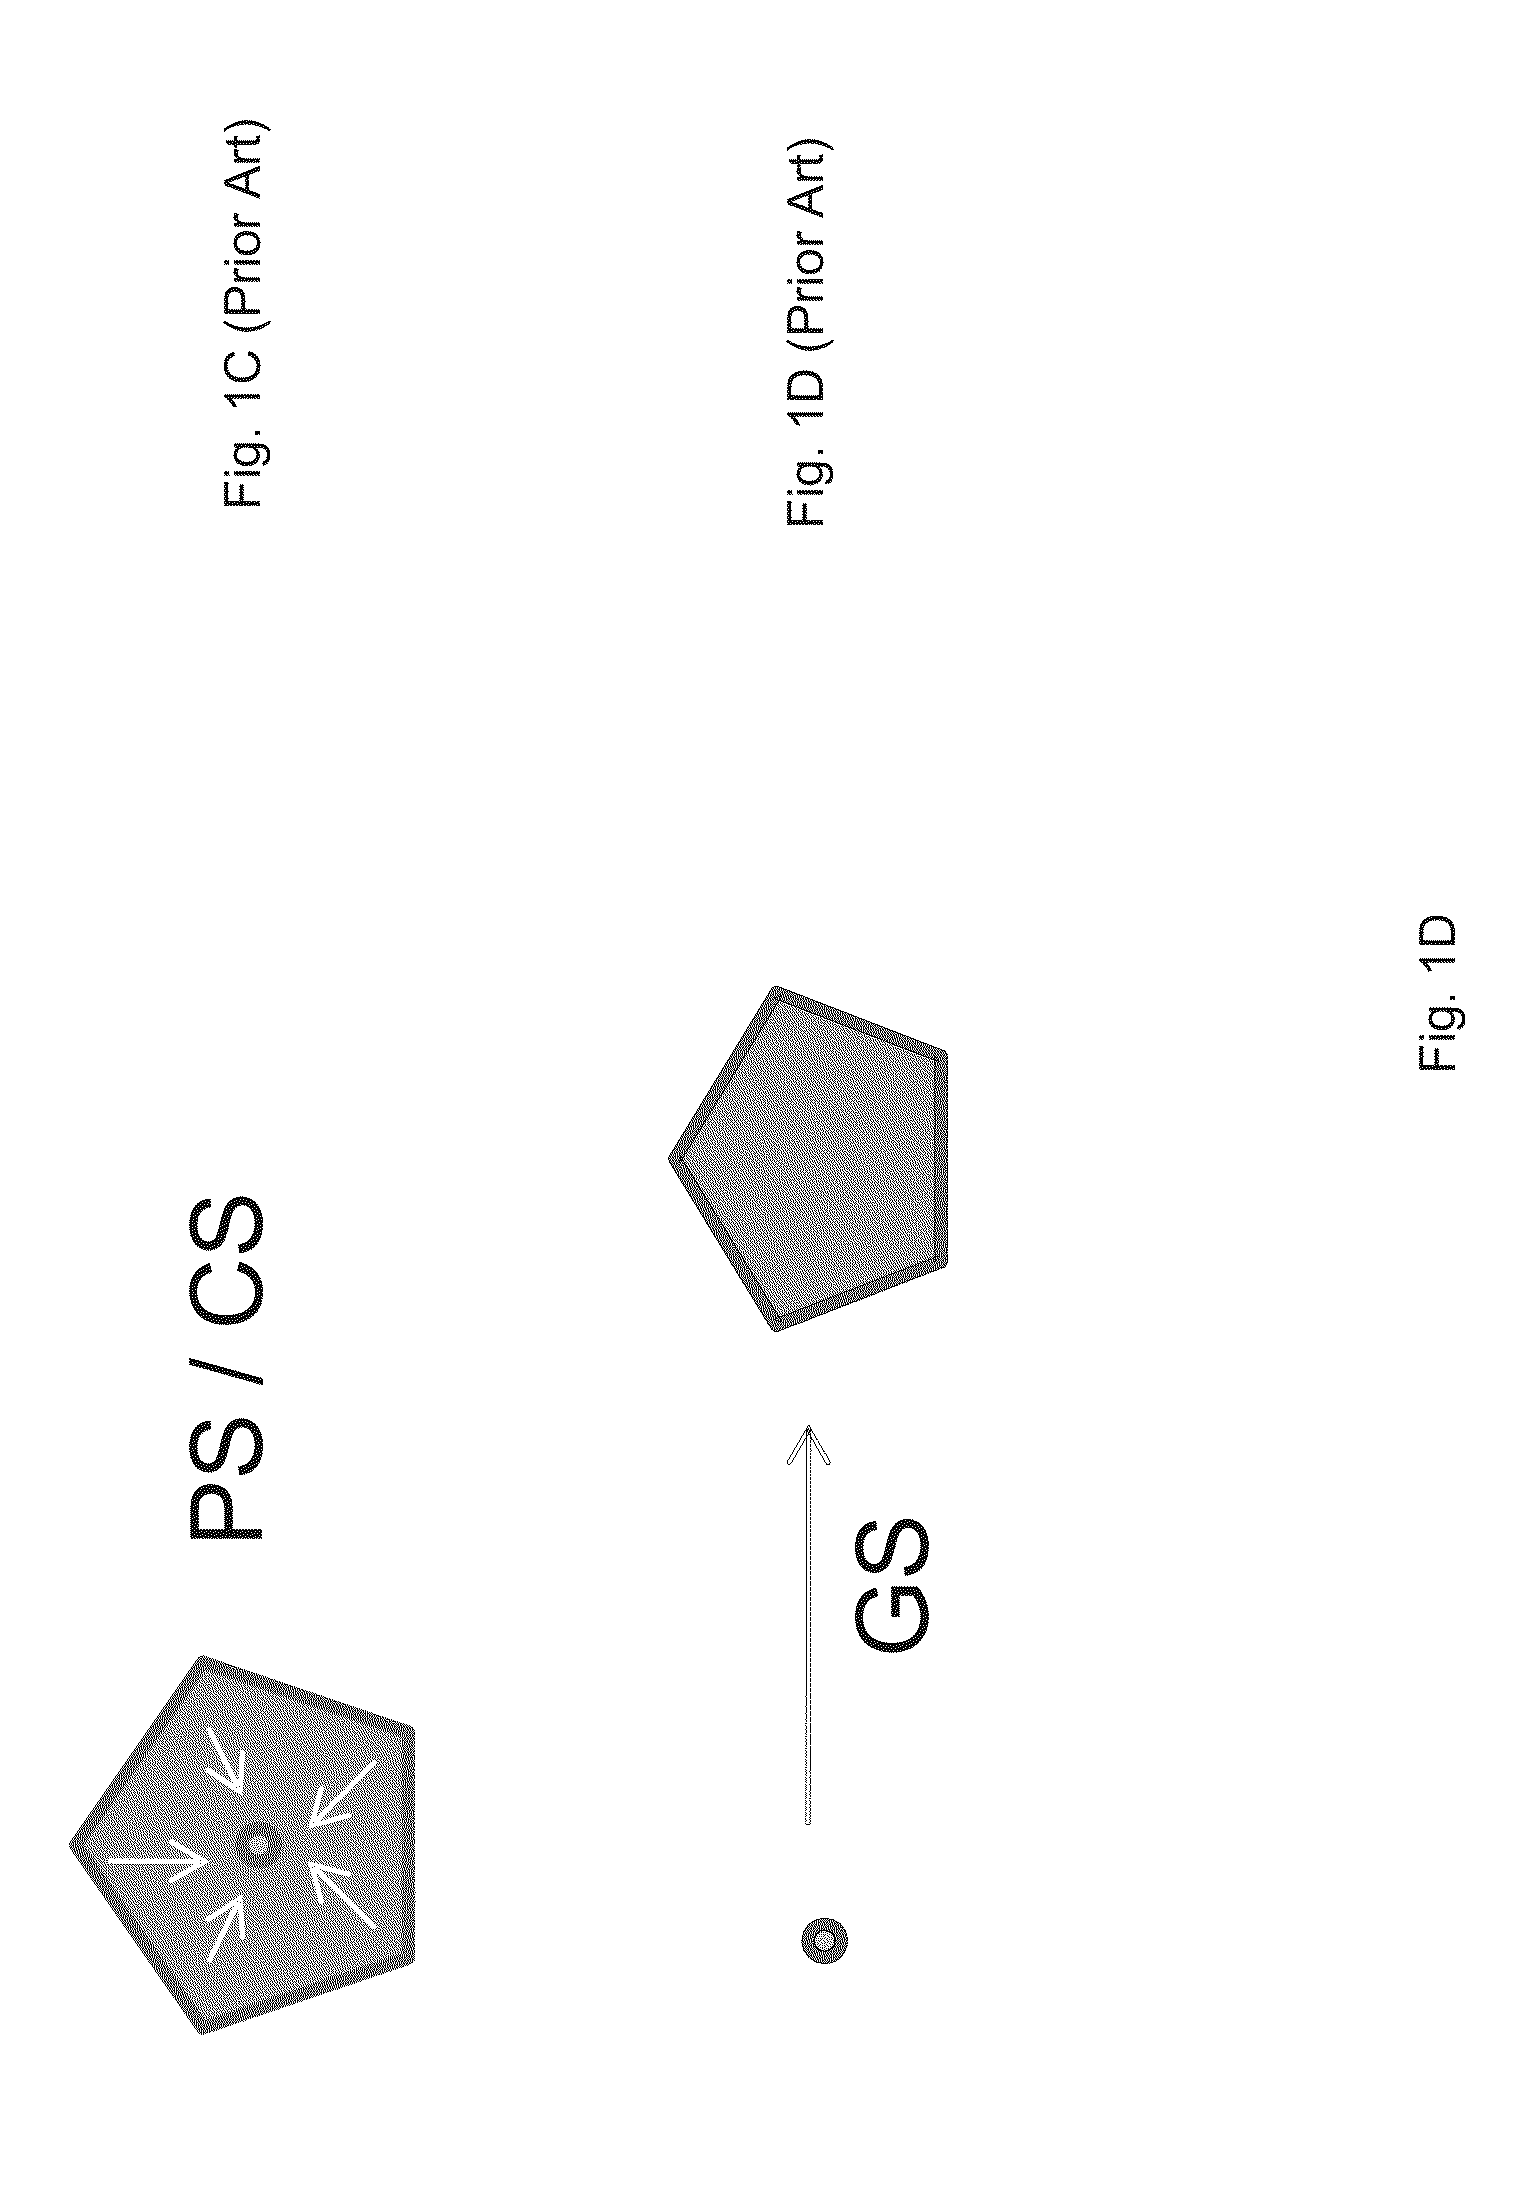 Method and system for rendering simulated depth-of-field visual effect